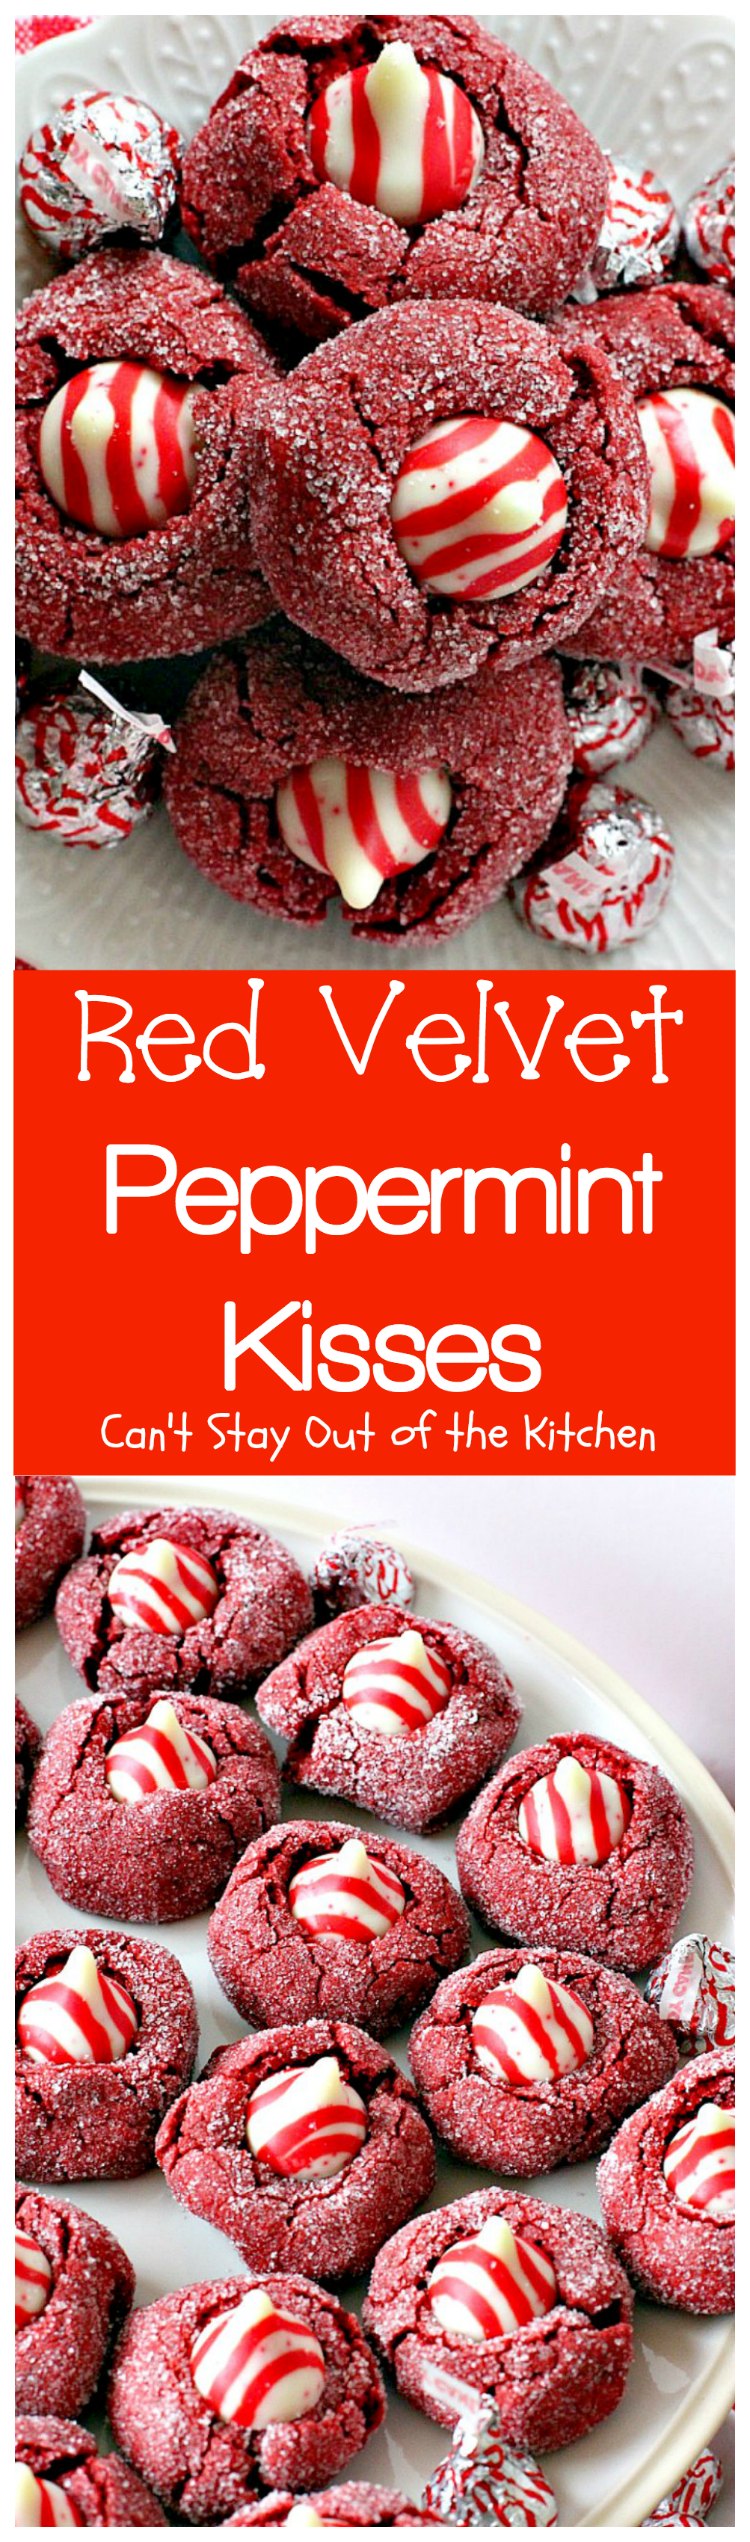 Red Velvet Peppermint Kisses | Can't Stay Out of the Kitchen